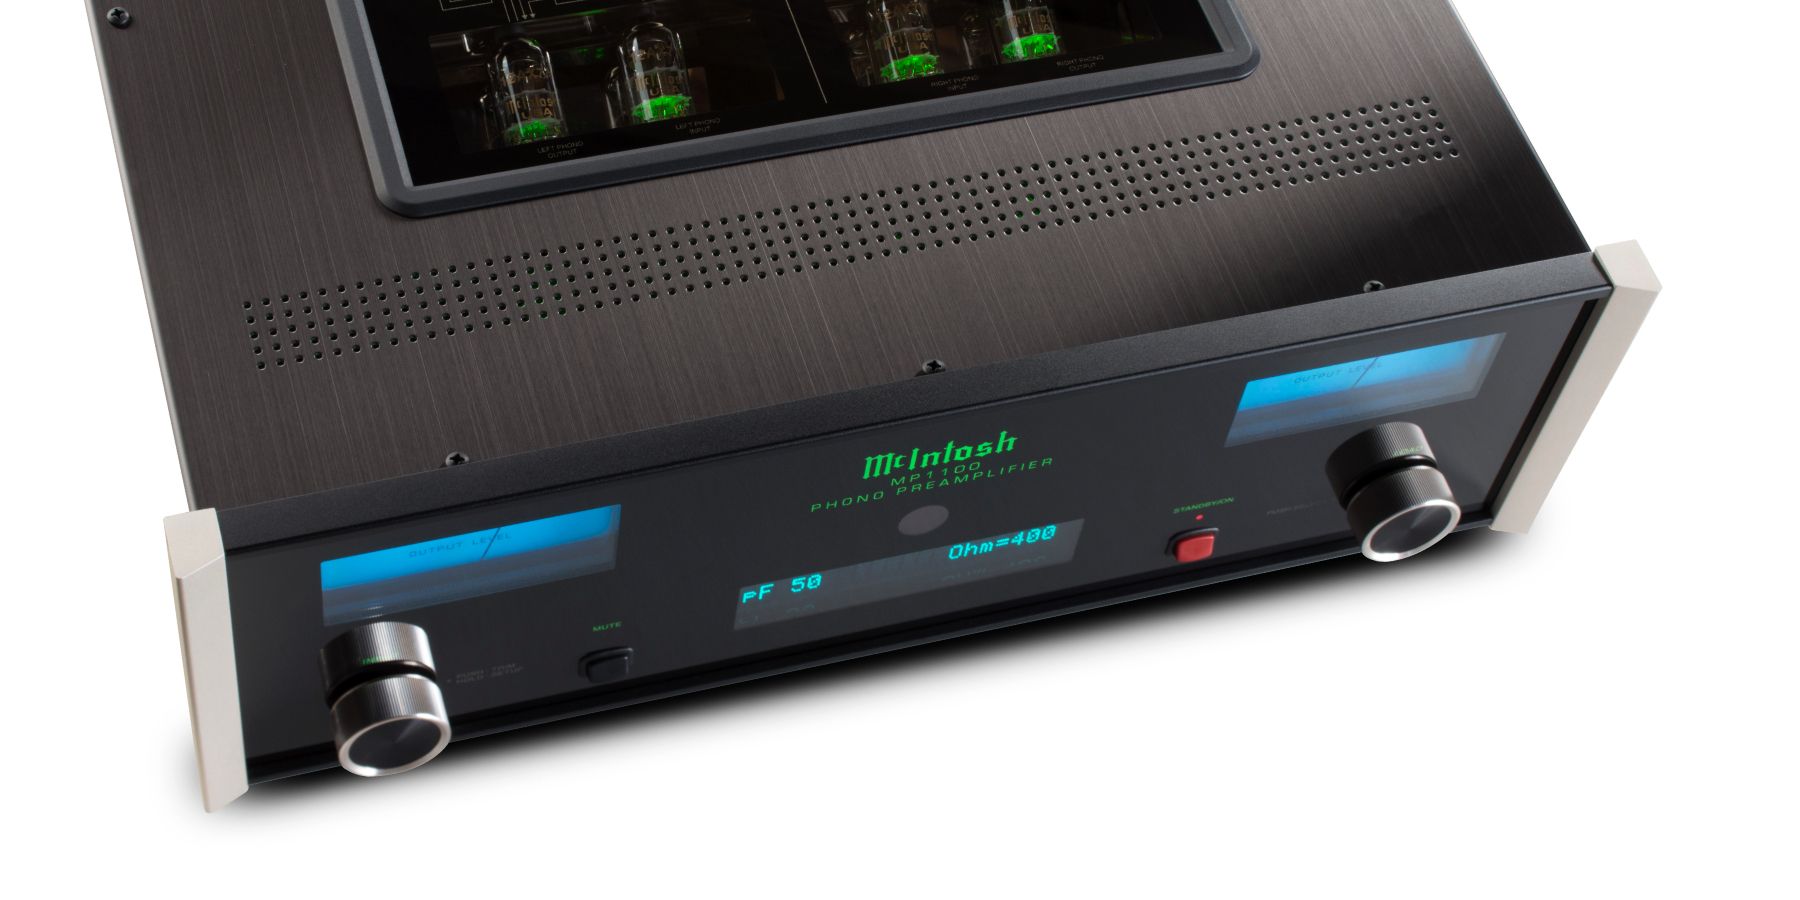 The McIntosh MP1100 Vacuum Tube Phono Preamplifier has been discontinued